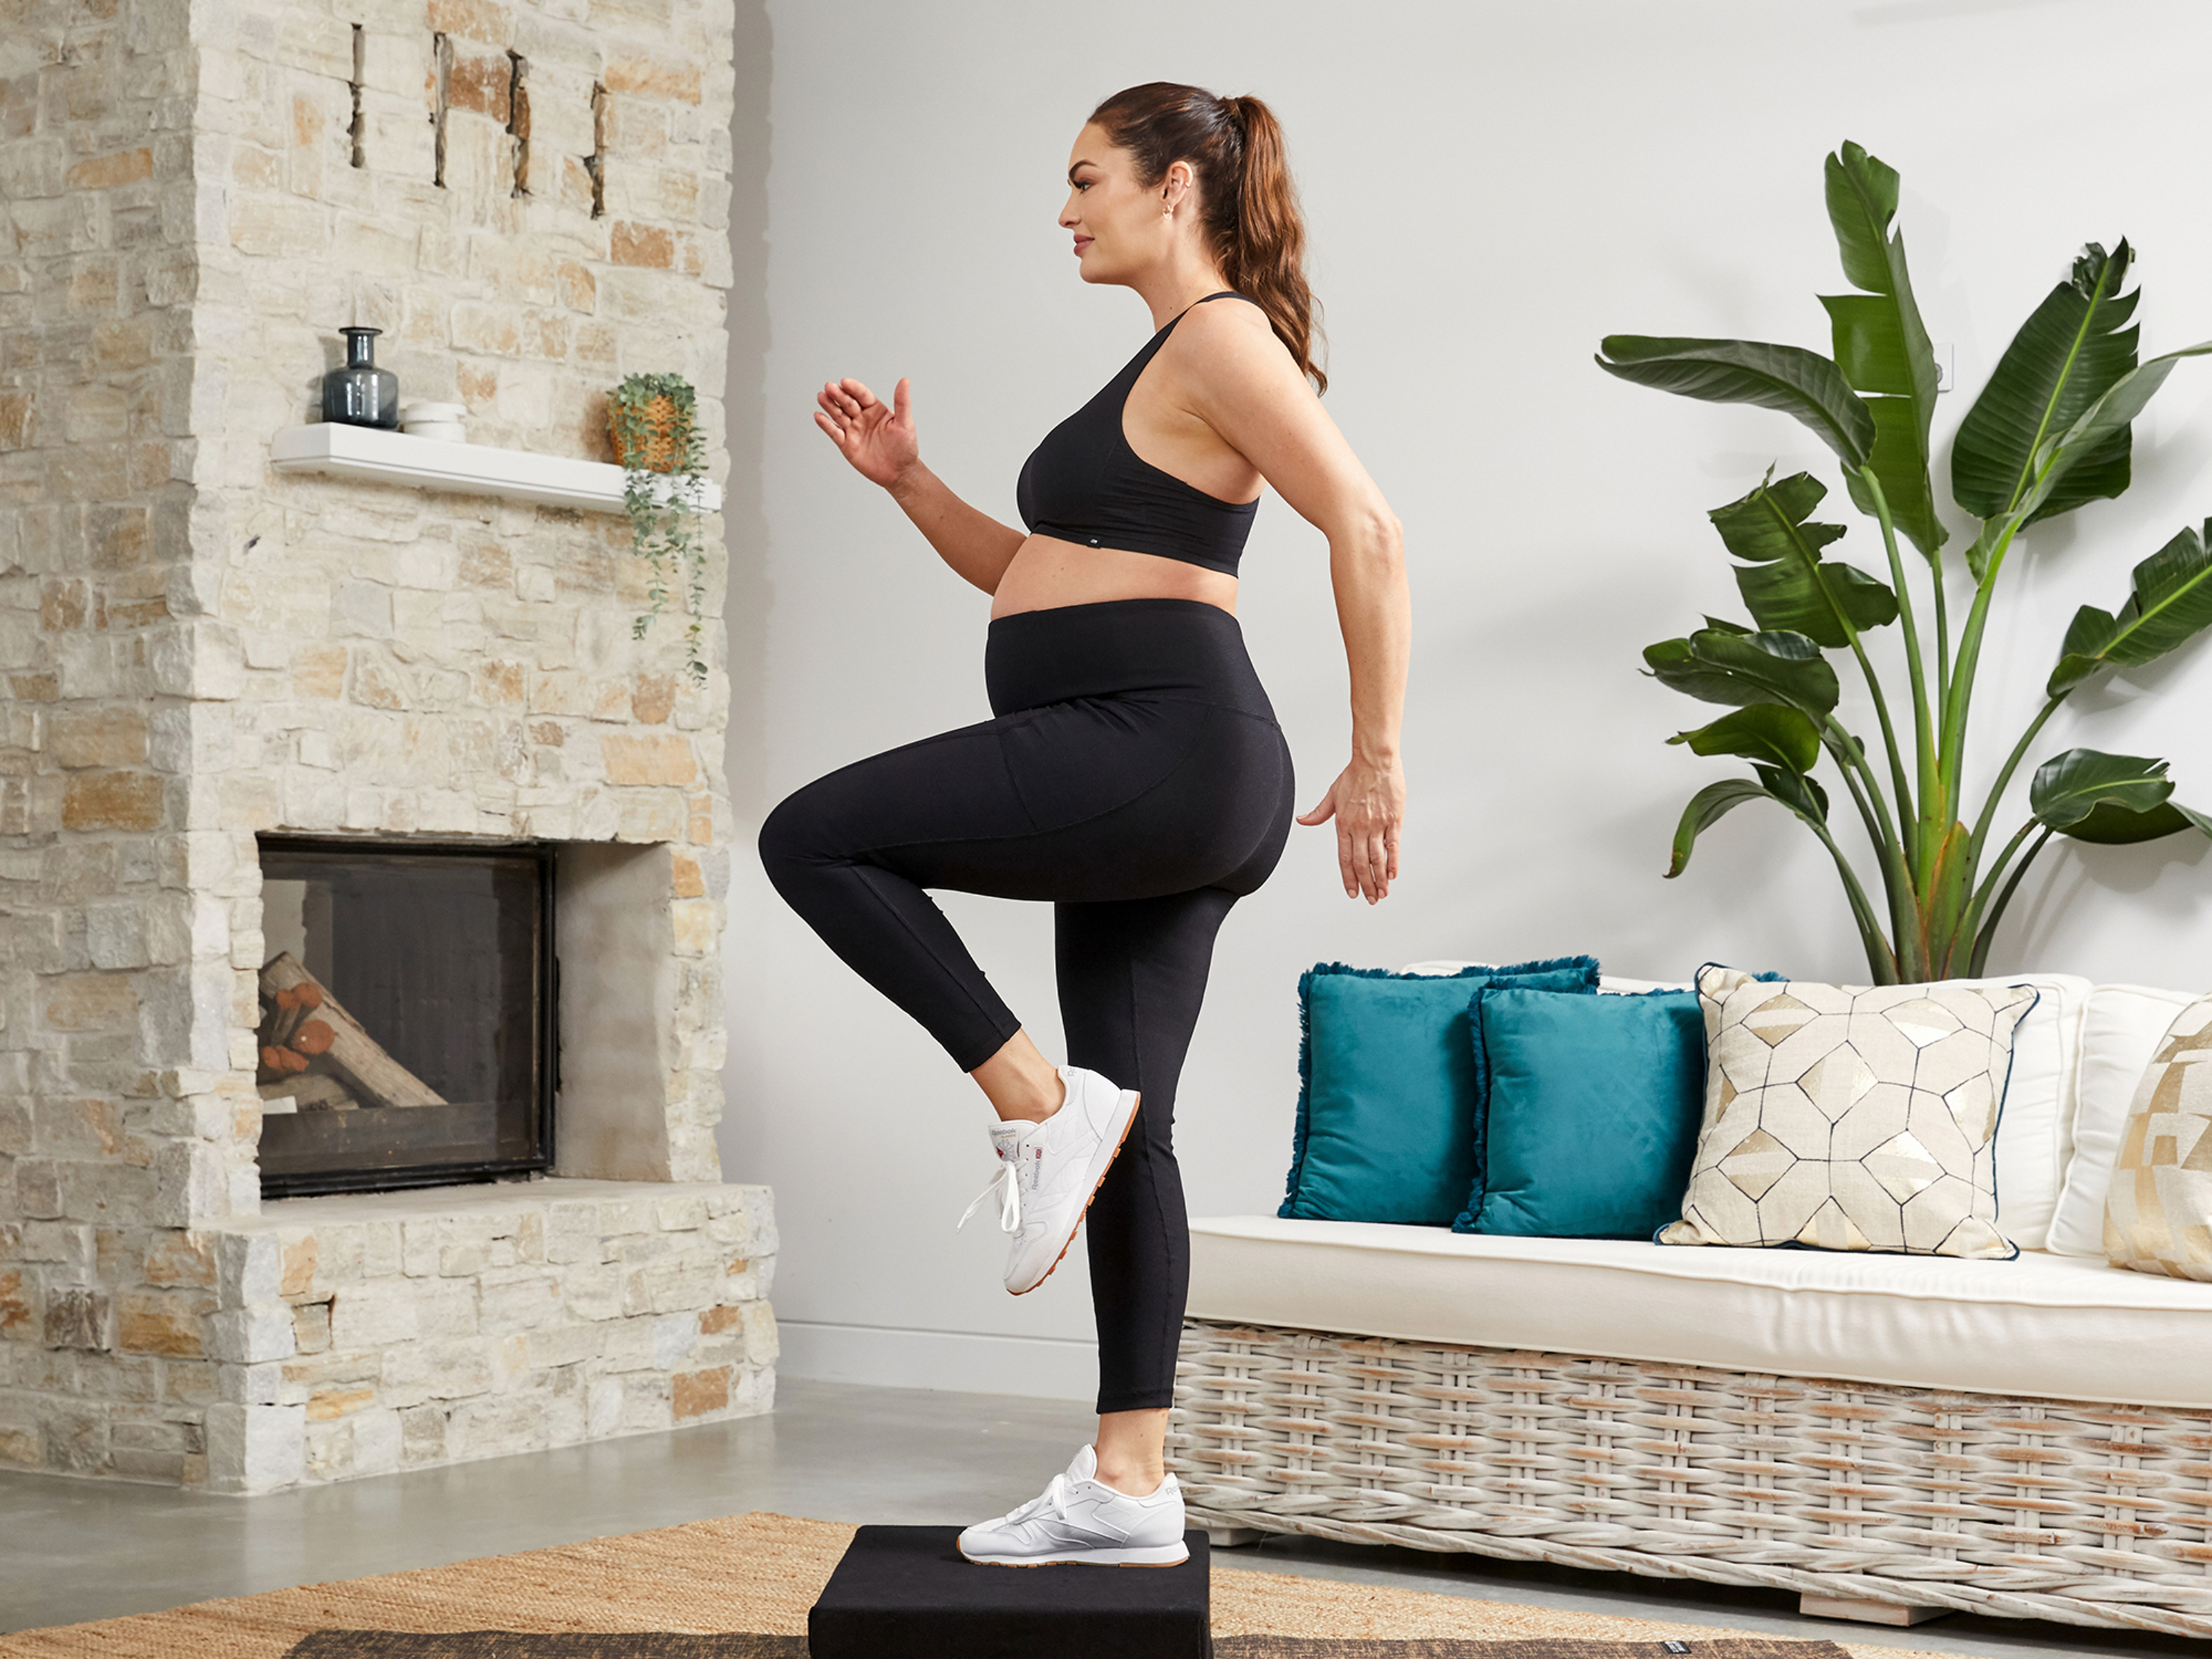 Your guide to safe cardio during pregnancy